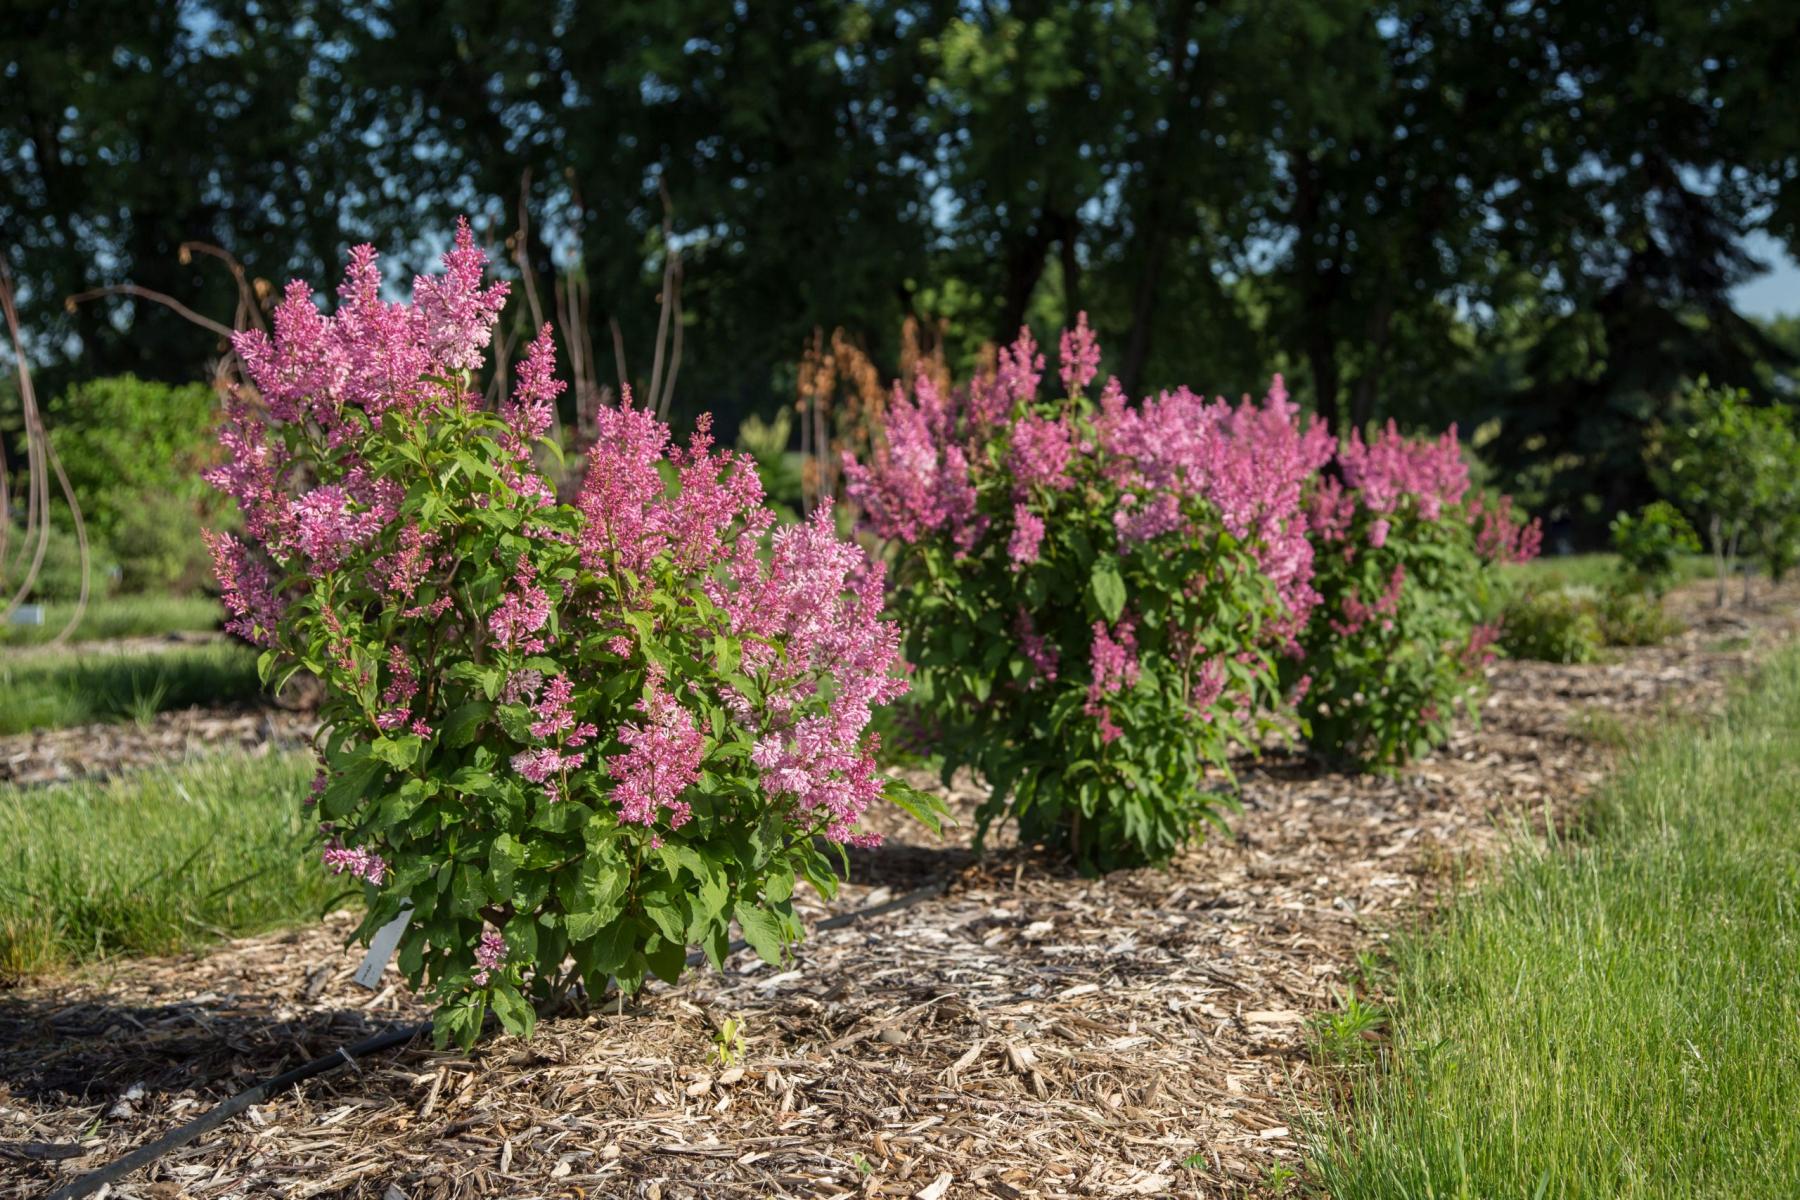 Image of 'Pinktini' lilac from Bailey Nursery. 